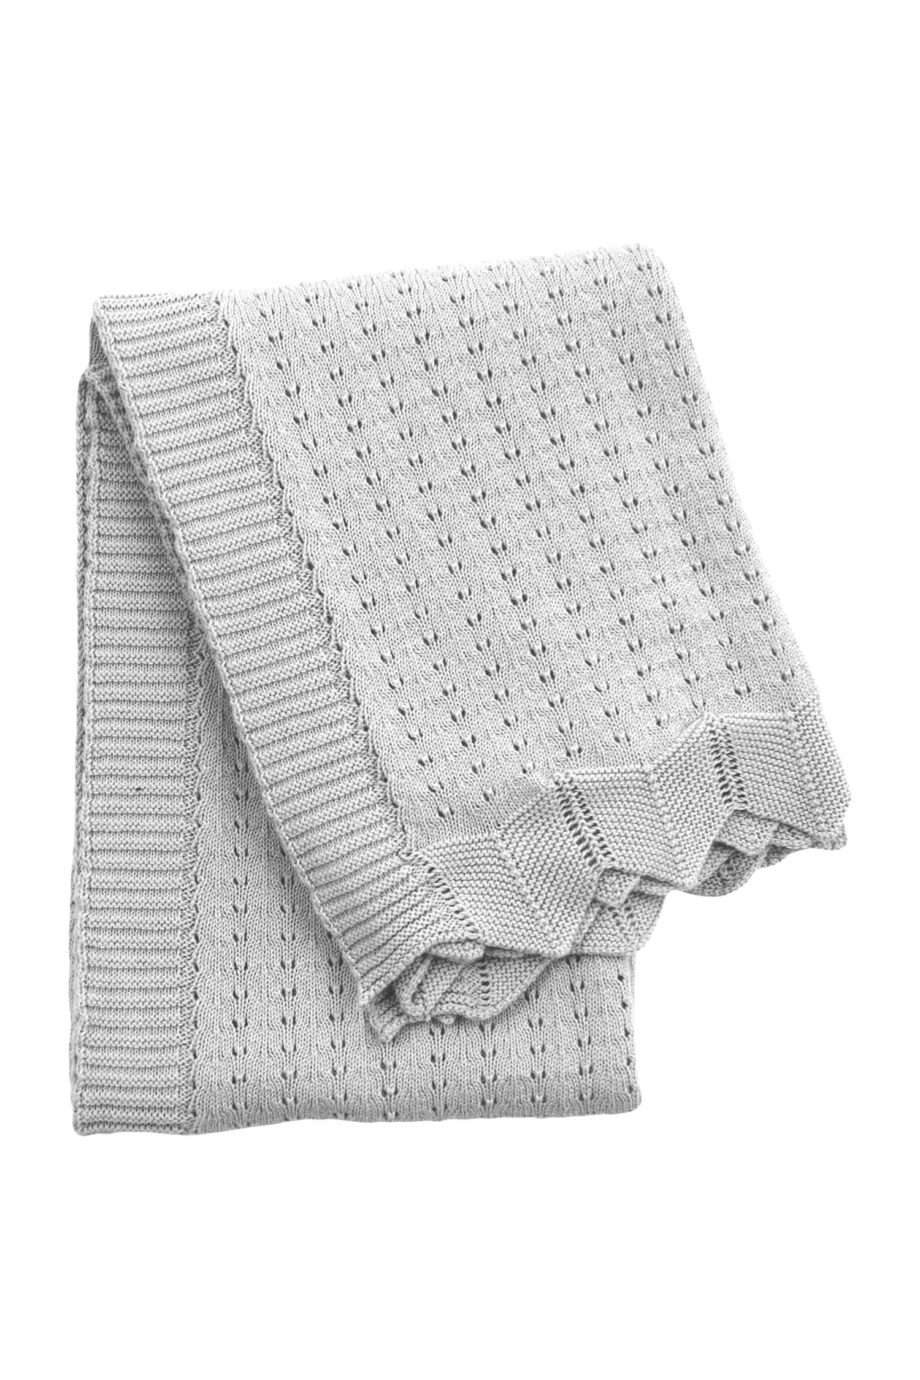 nouveau lilly white knitted cotton little blanket medium